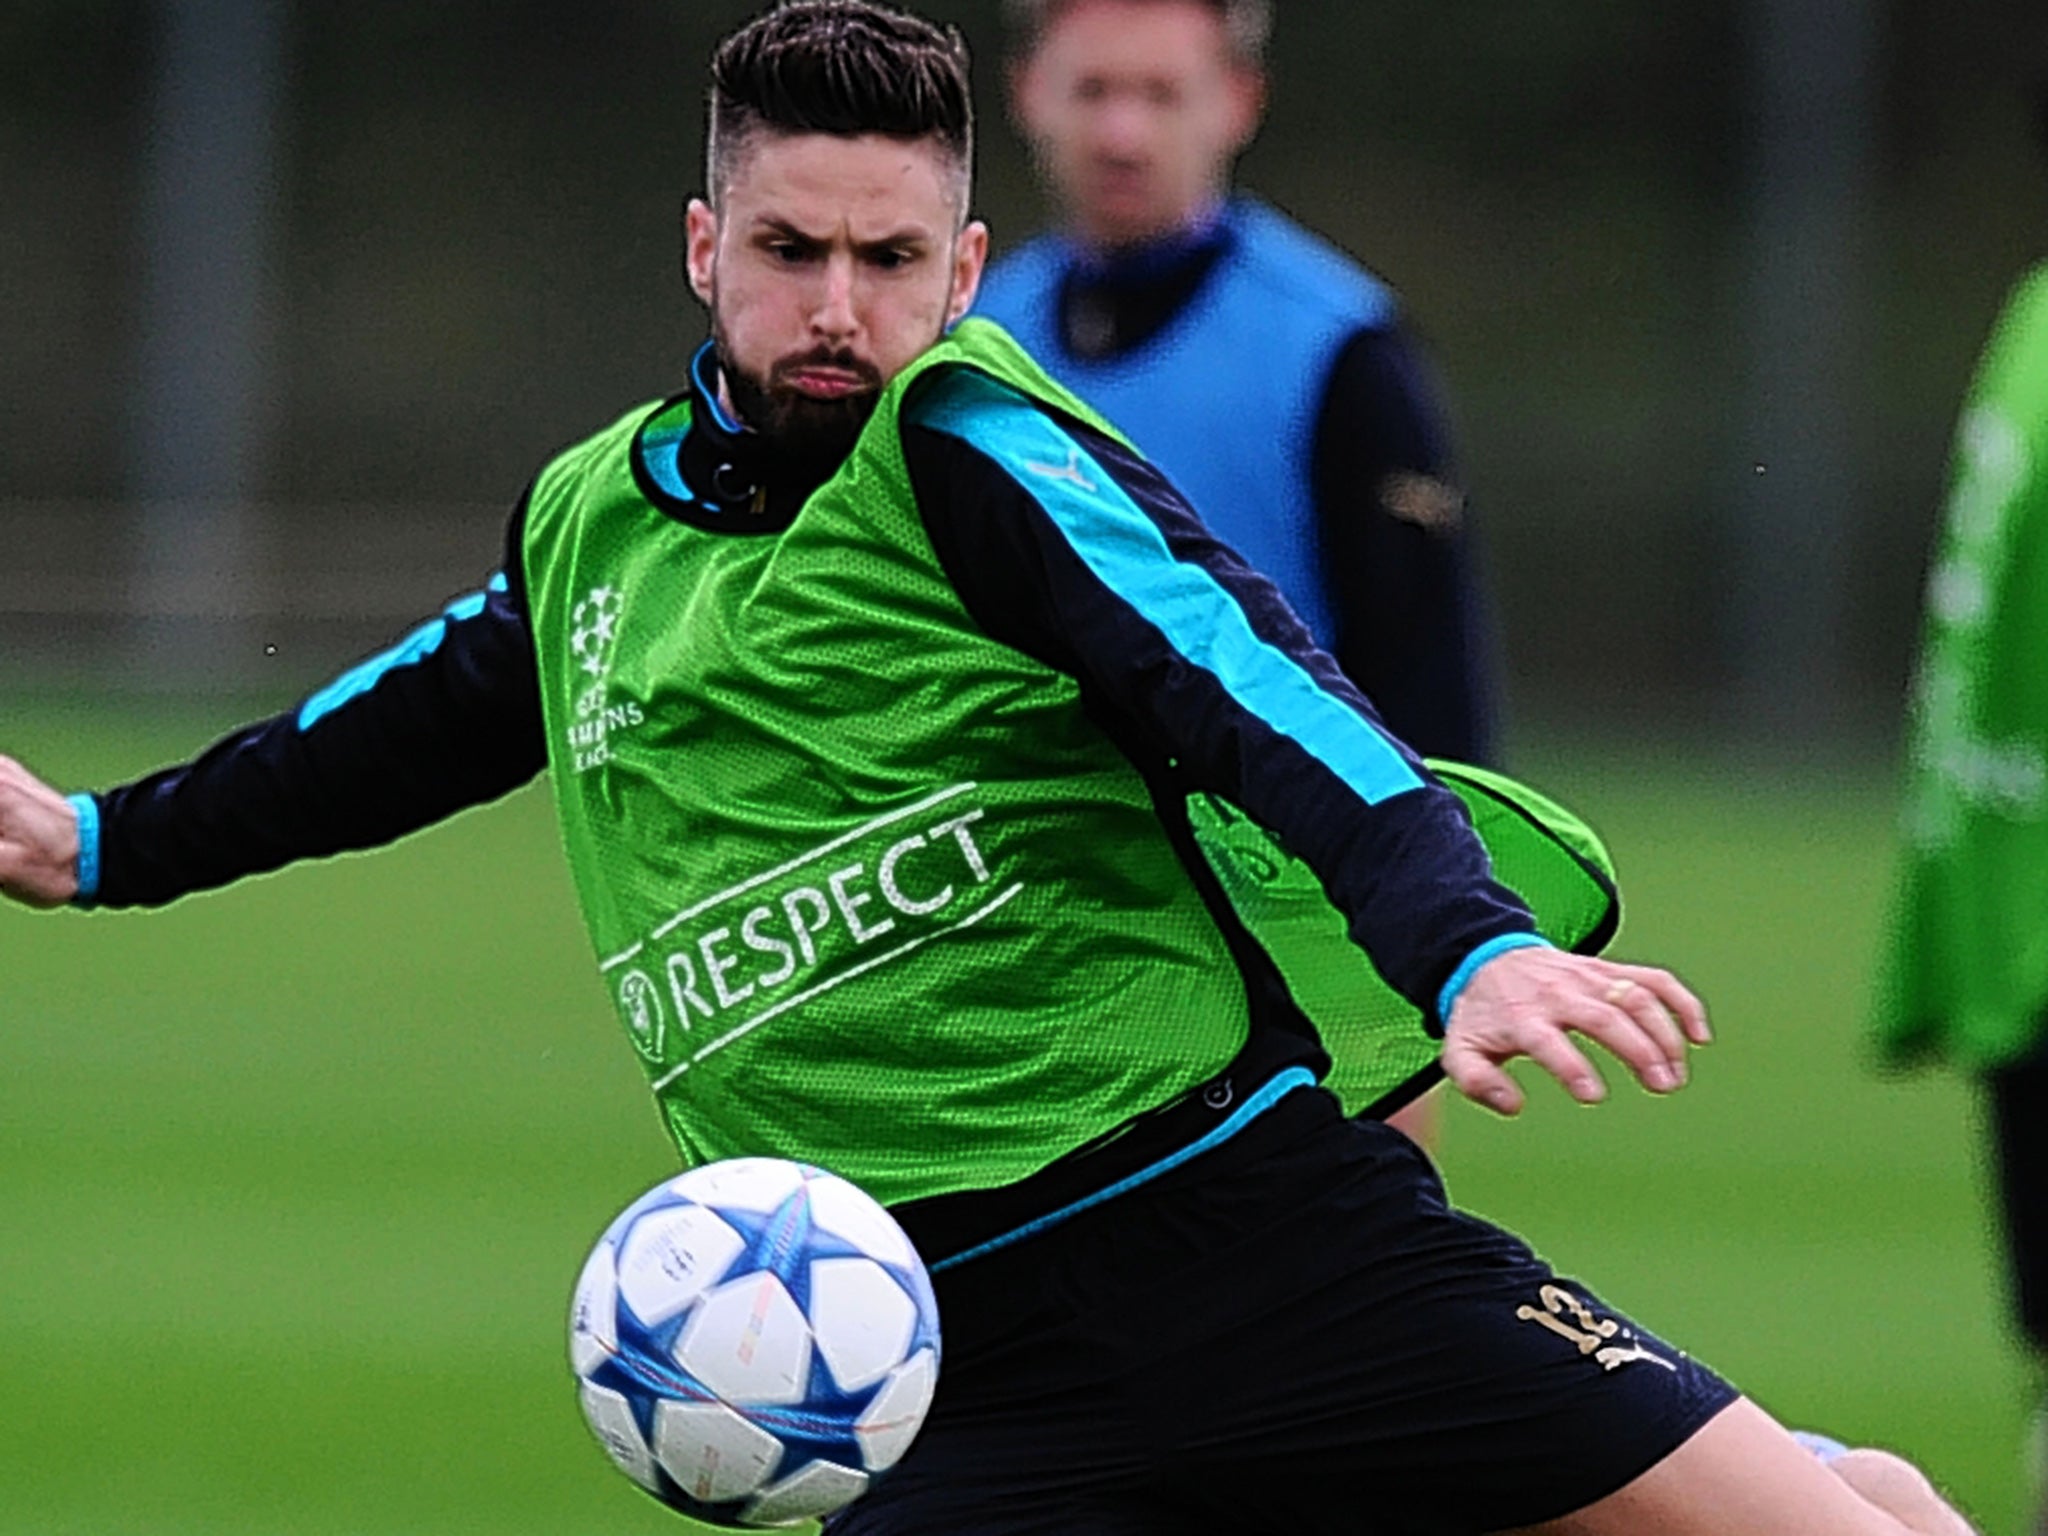 French striker Olivier Giroud gets in some shooting practice ahead of Arsenal’s match against Olympiakos